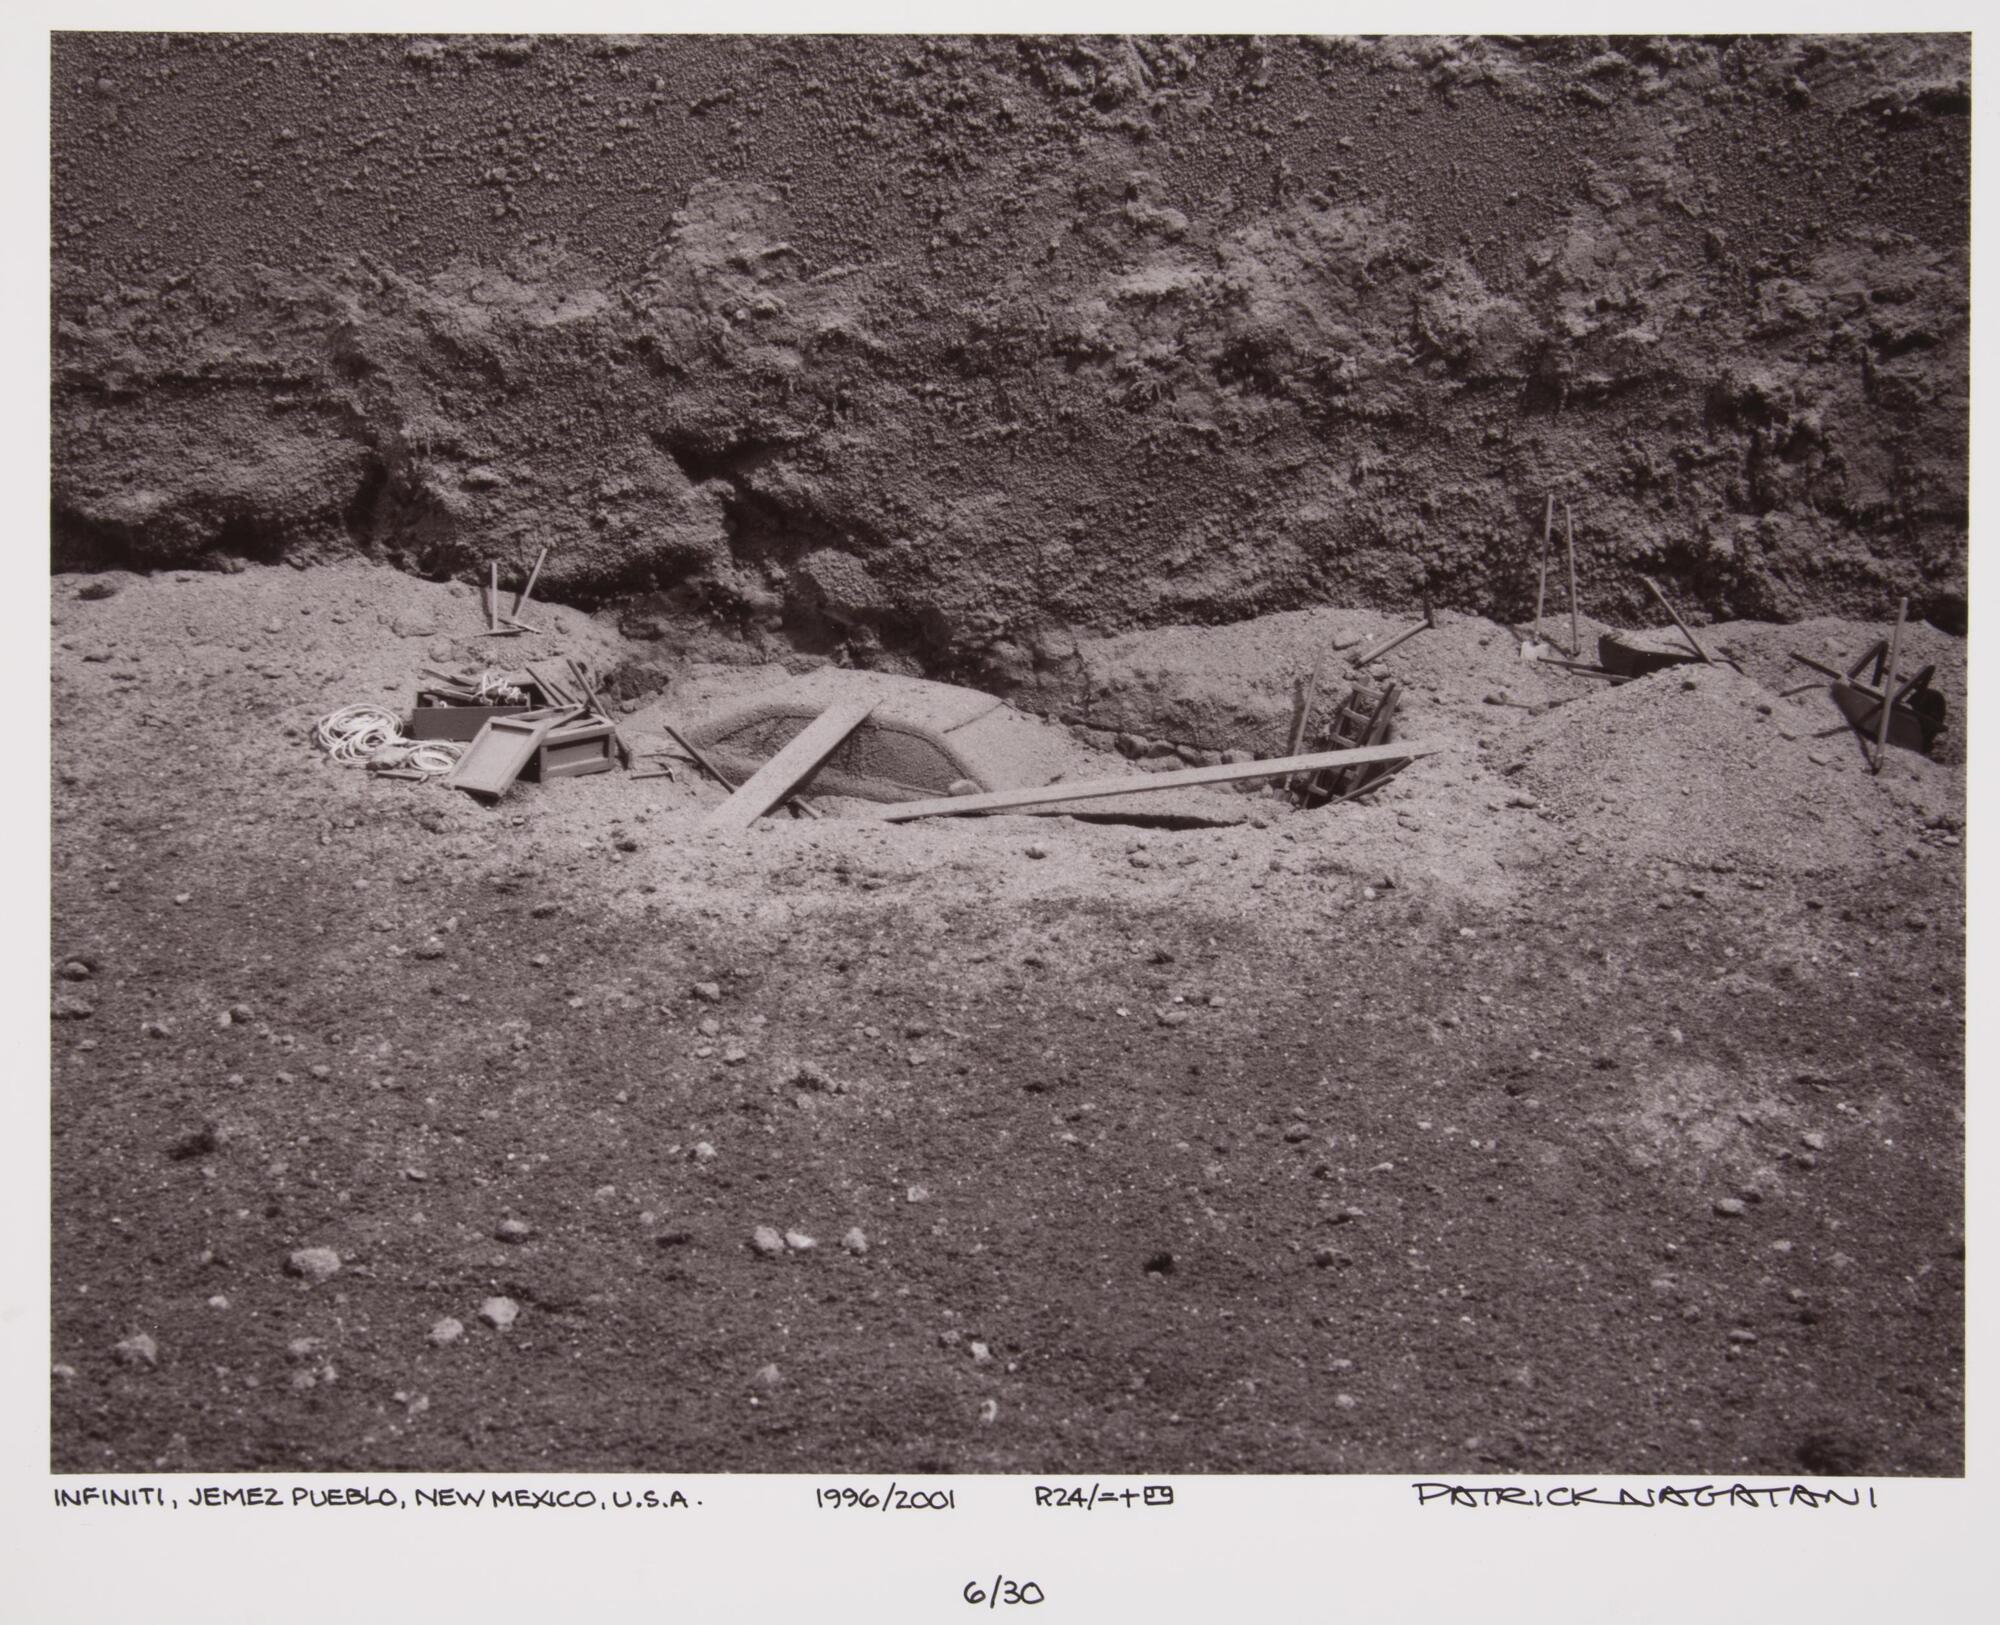 This photograph depicts a view looking downwards at an archeological excavation of a car.  There are shovels and other supplies strewn about the site.